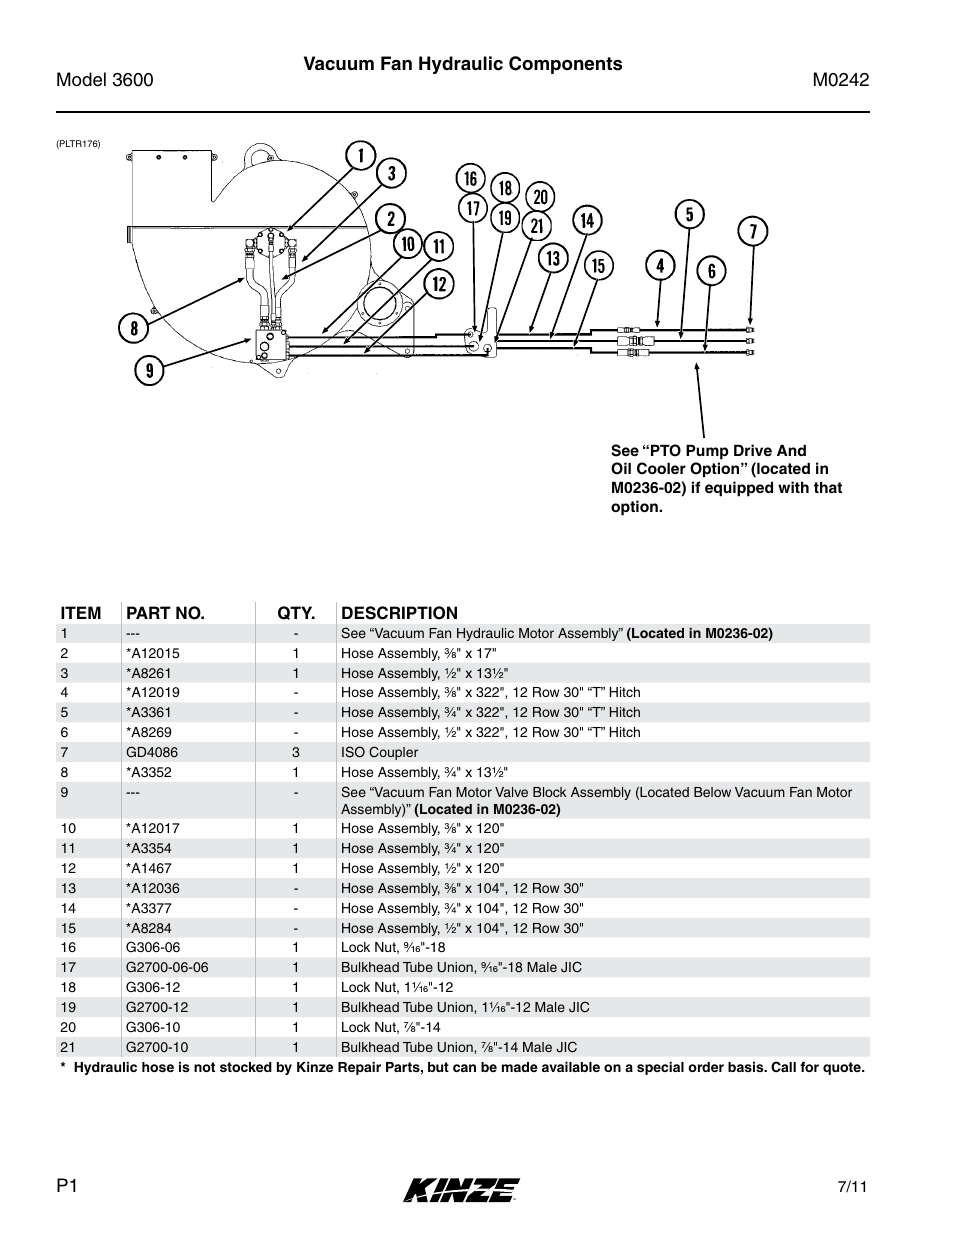 Vacuum fan hydraulic components | Kinze 3600 Lift and Rotate Planter Rev. 6/14 User Manual | Page 4 / 40